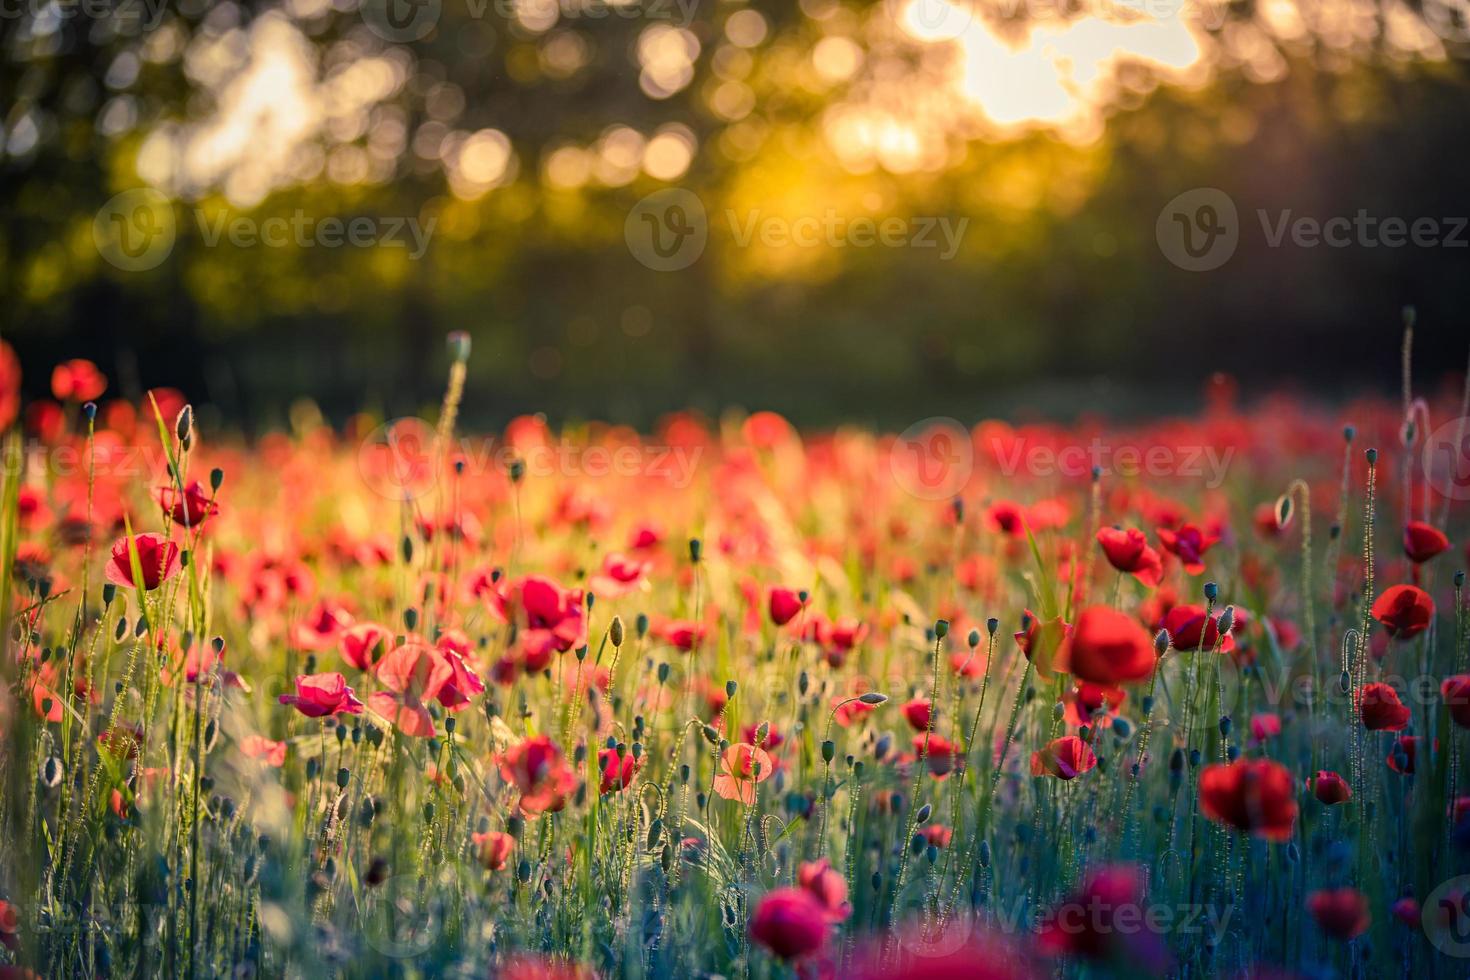 Wonderful floral landscape at sunset. Wild flowers in springtime. Beautiful natural landscape in the summertime. Amazing nature sunny scene, red poppy flowers, blurred forest field photo